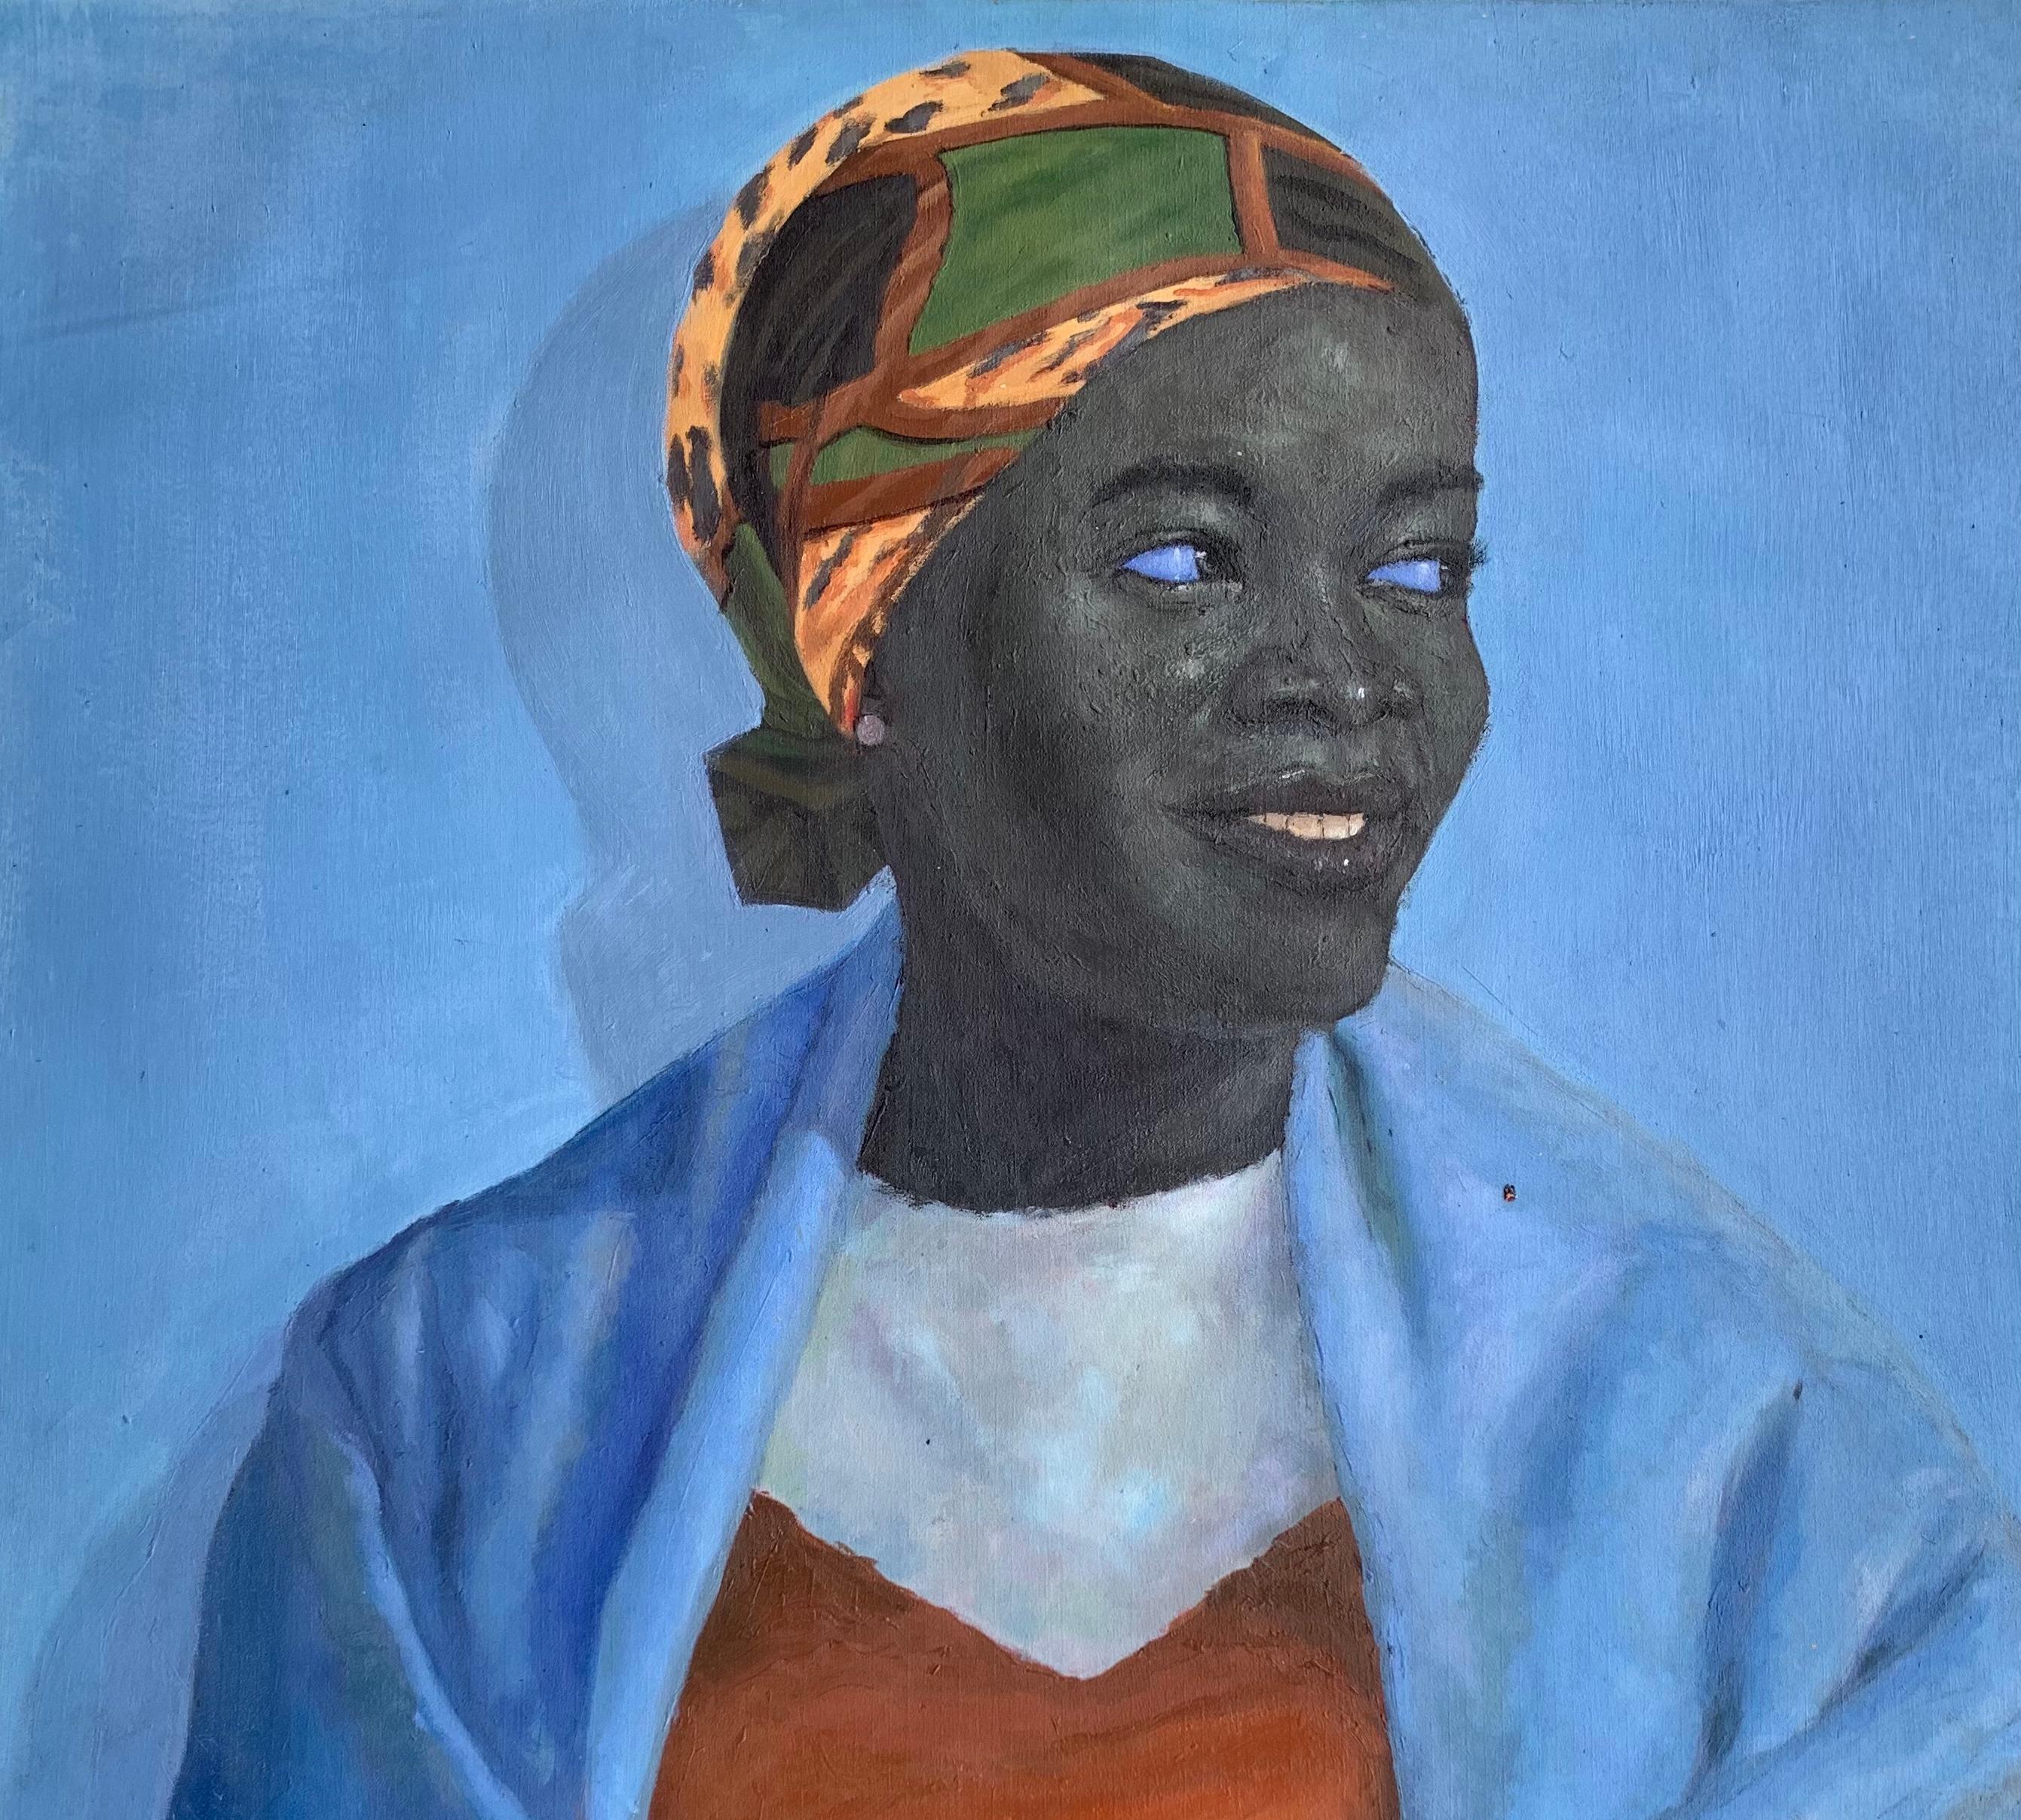 Blue Towel 1 - Painting by Olamilekan Bello